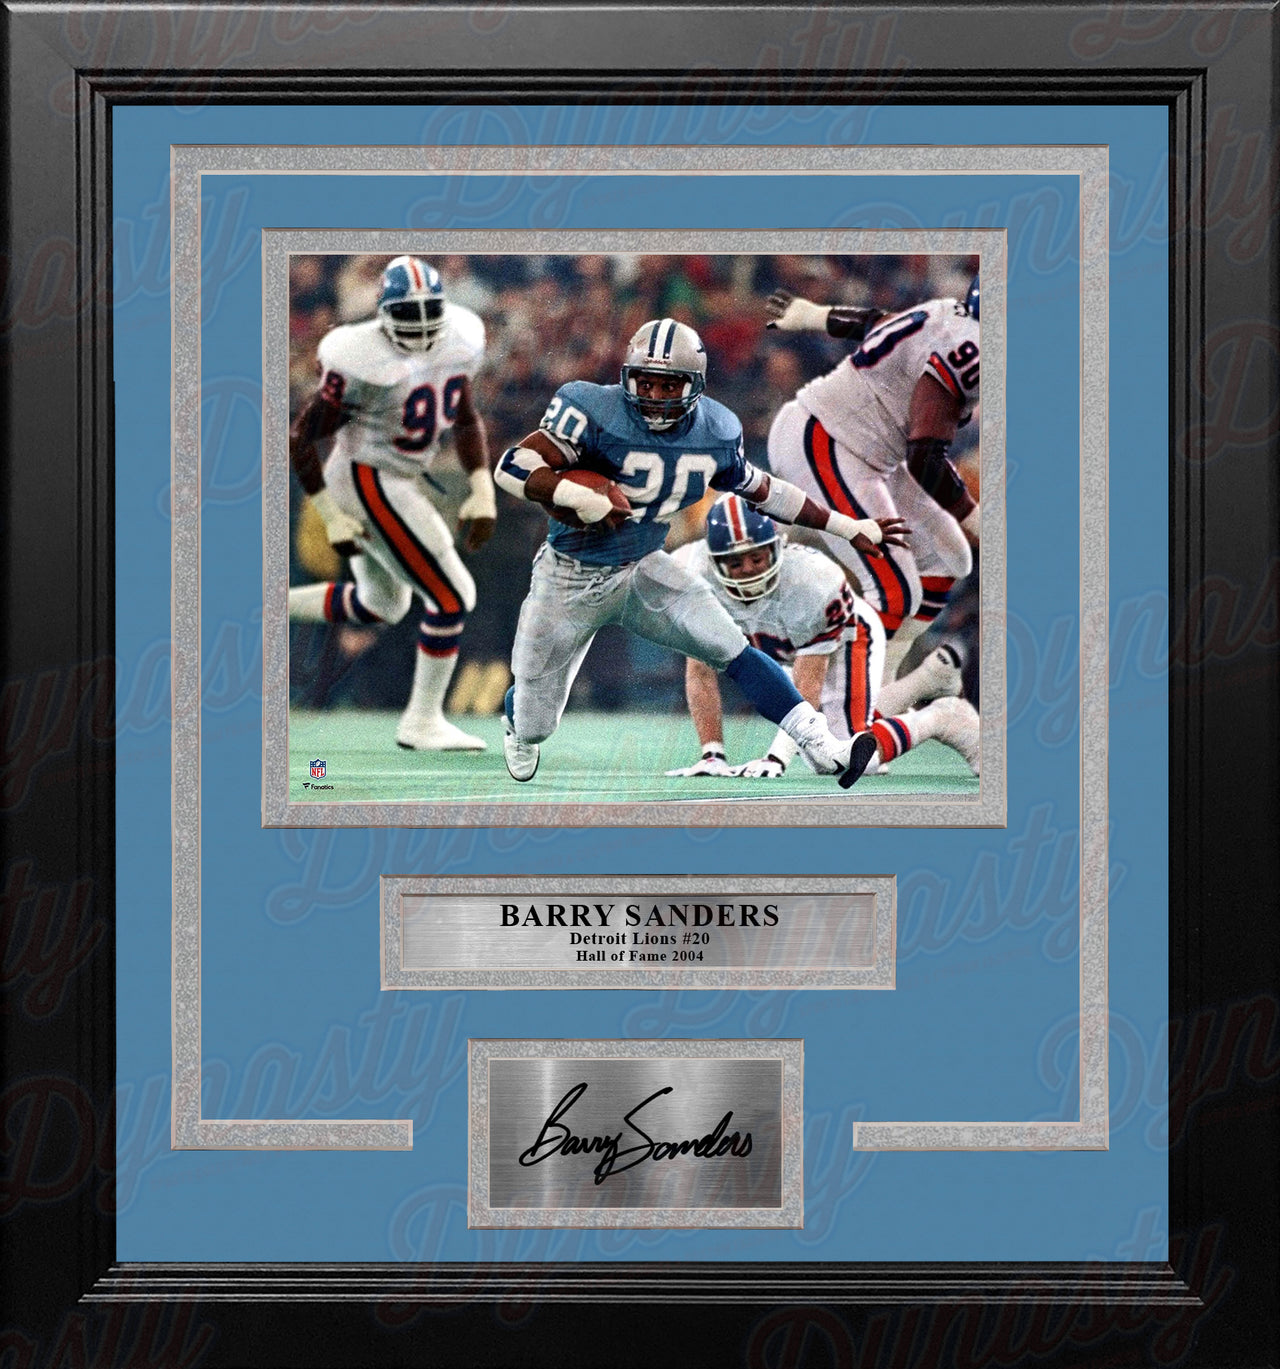 Barry Sanders in Action Detroit Lions 8" x 10" Framed Football Photo with Engraved Autograph - Dynasty Sports & Framing 